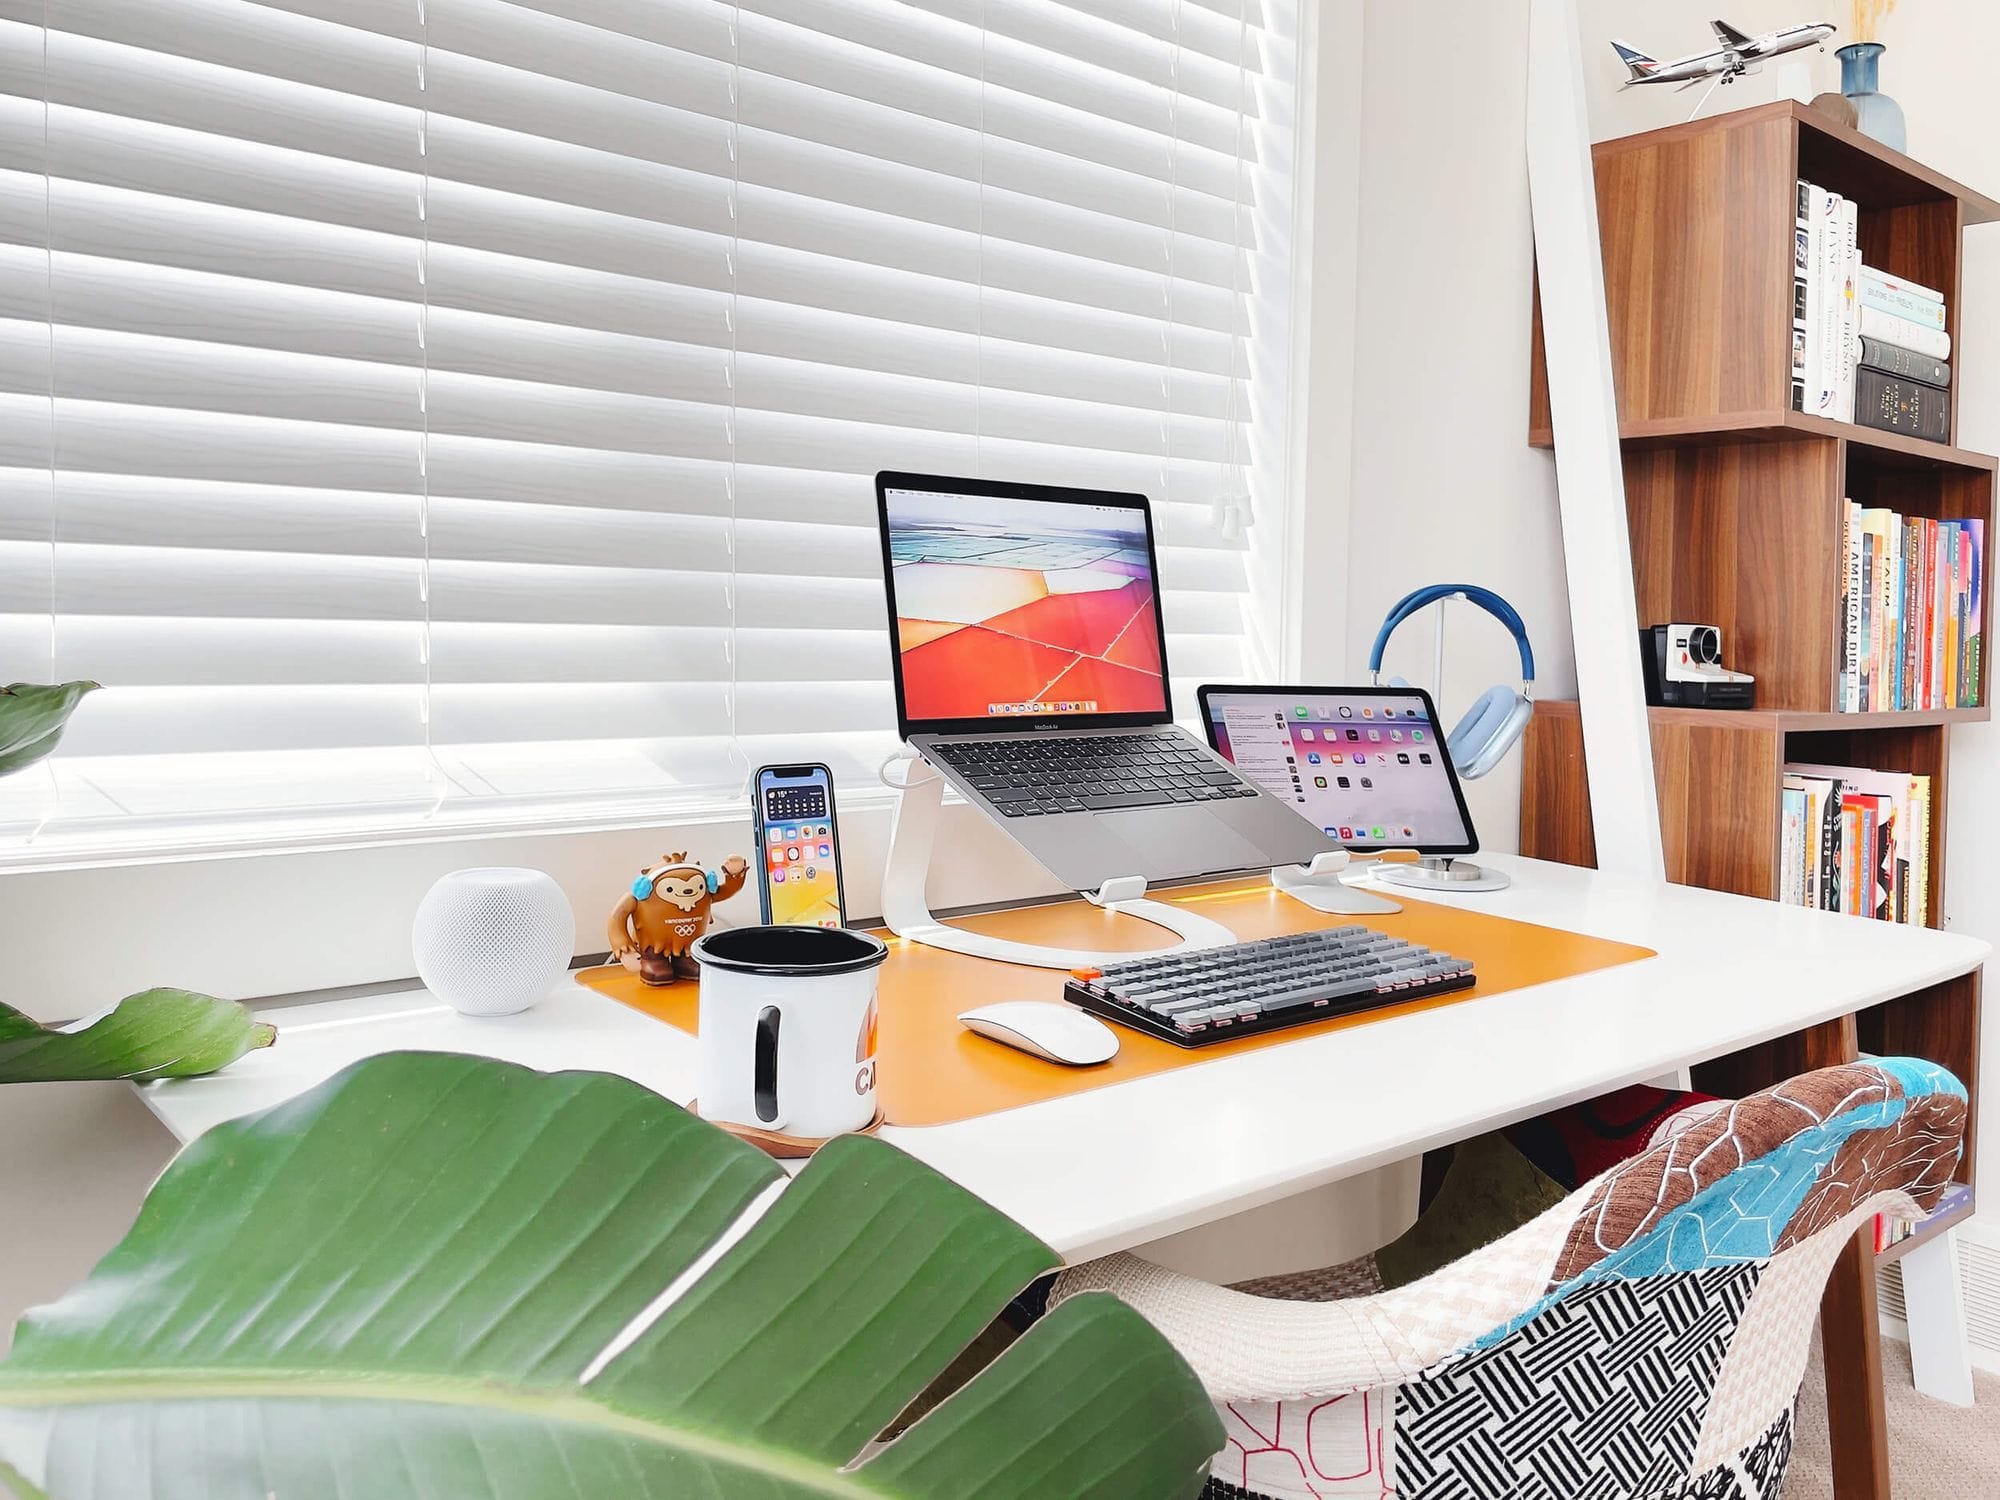 A cheerful home office space with a MacBook, iPad, iPhone on a charging dock, and a mechanical keyboard on a white desk mat, complete with a coffee mug, decorative figurine, HomePod, and cosy quilted chair, against a backdrop of white blinds and a bookshelf